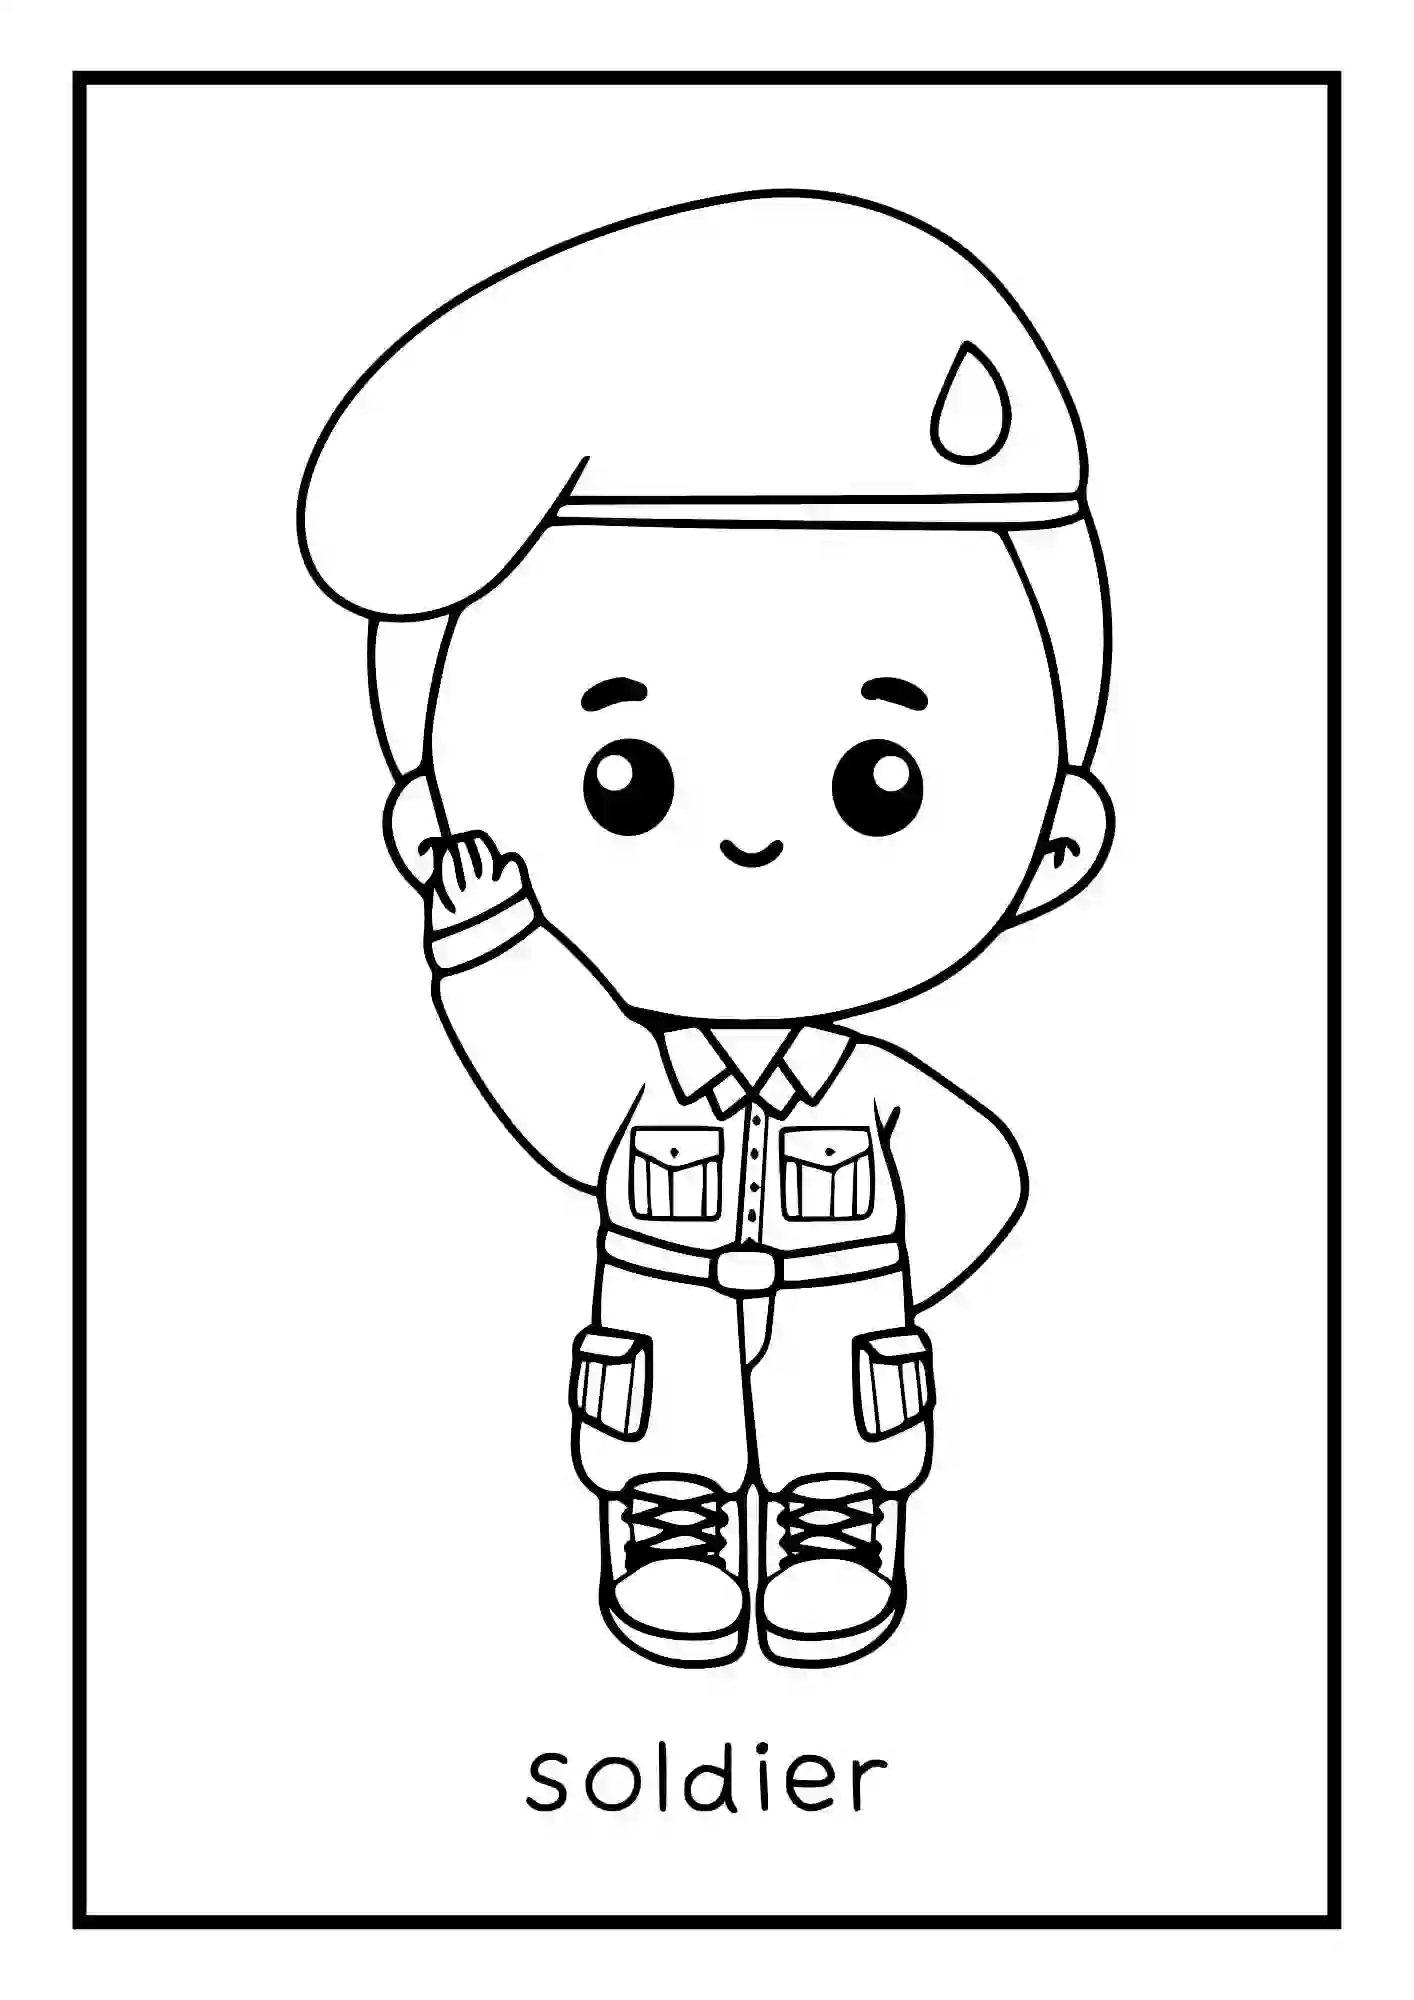 Different Professions, occupations, carriers, jobs, Coloring Worksheets (soldier)